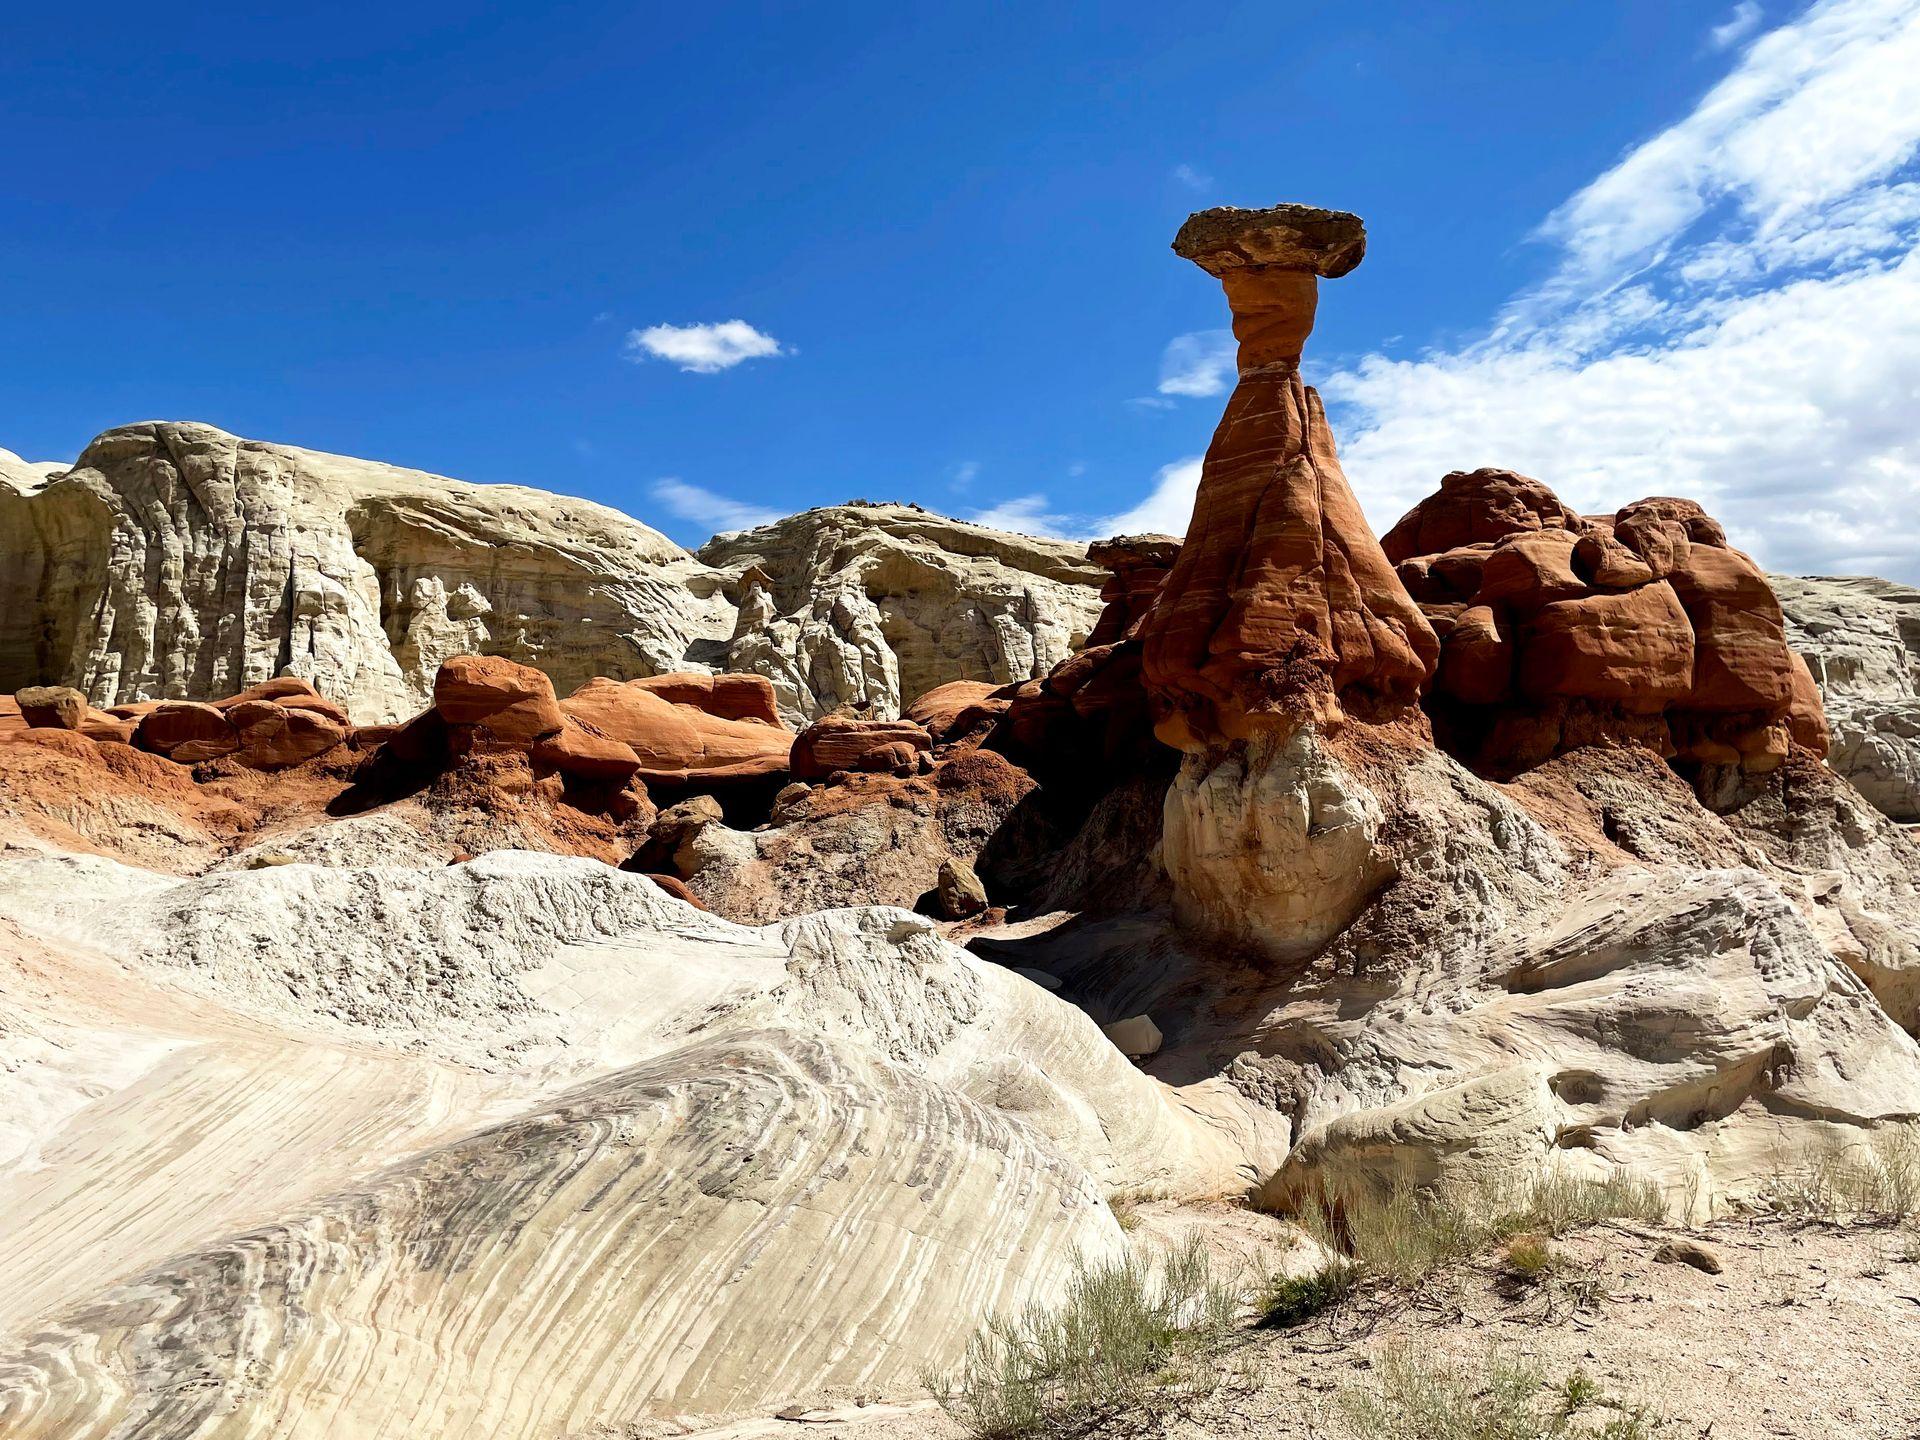 White and orange rocks and hoodoo rock formations on the Toadstool Hoodoos trail.